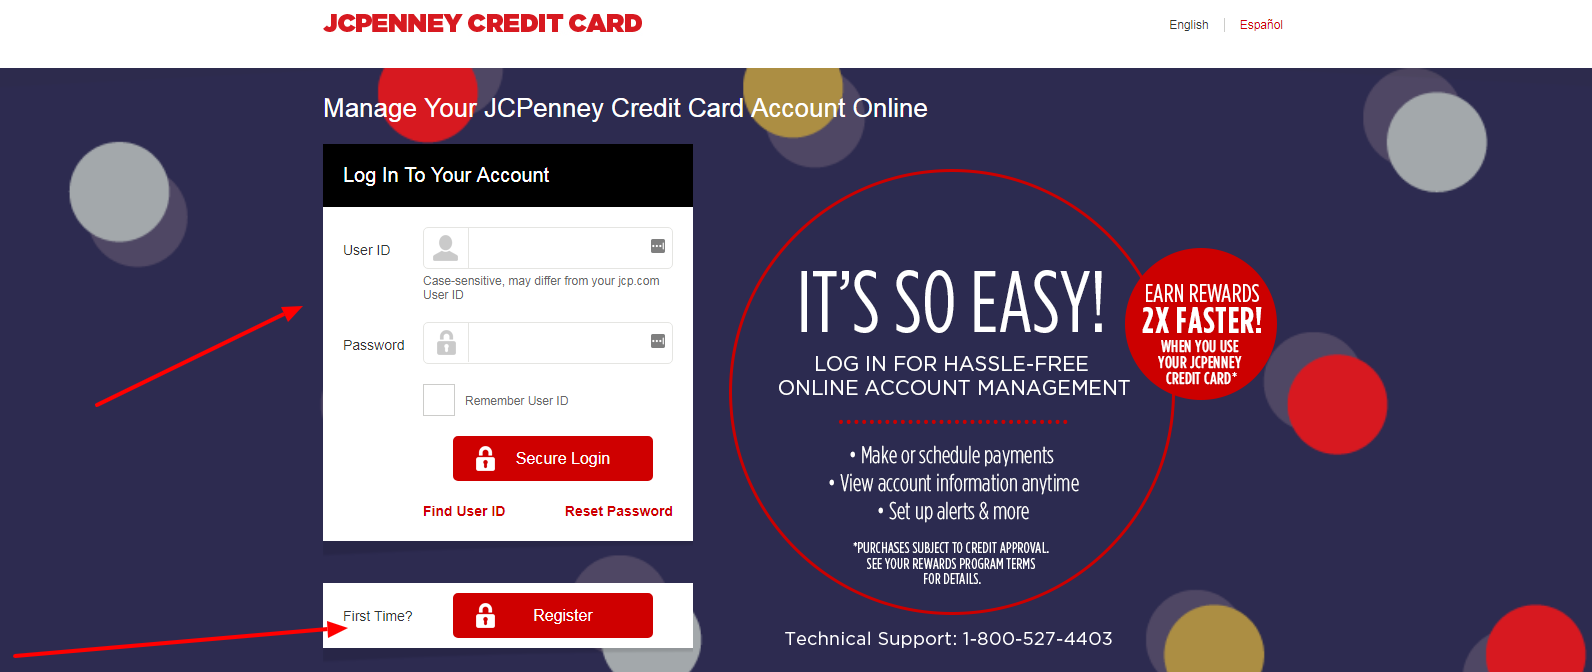 log in to your jc penney credit card account